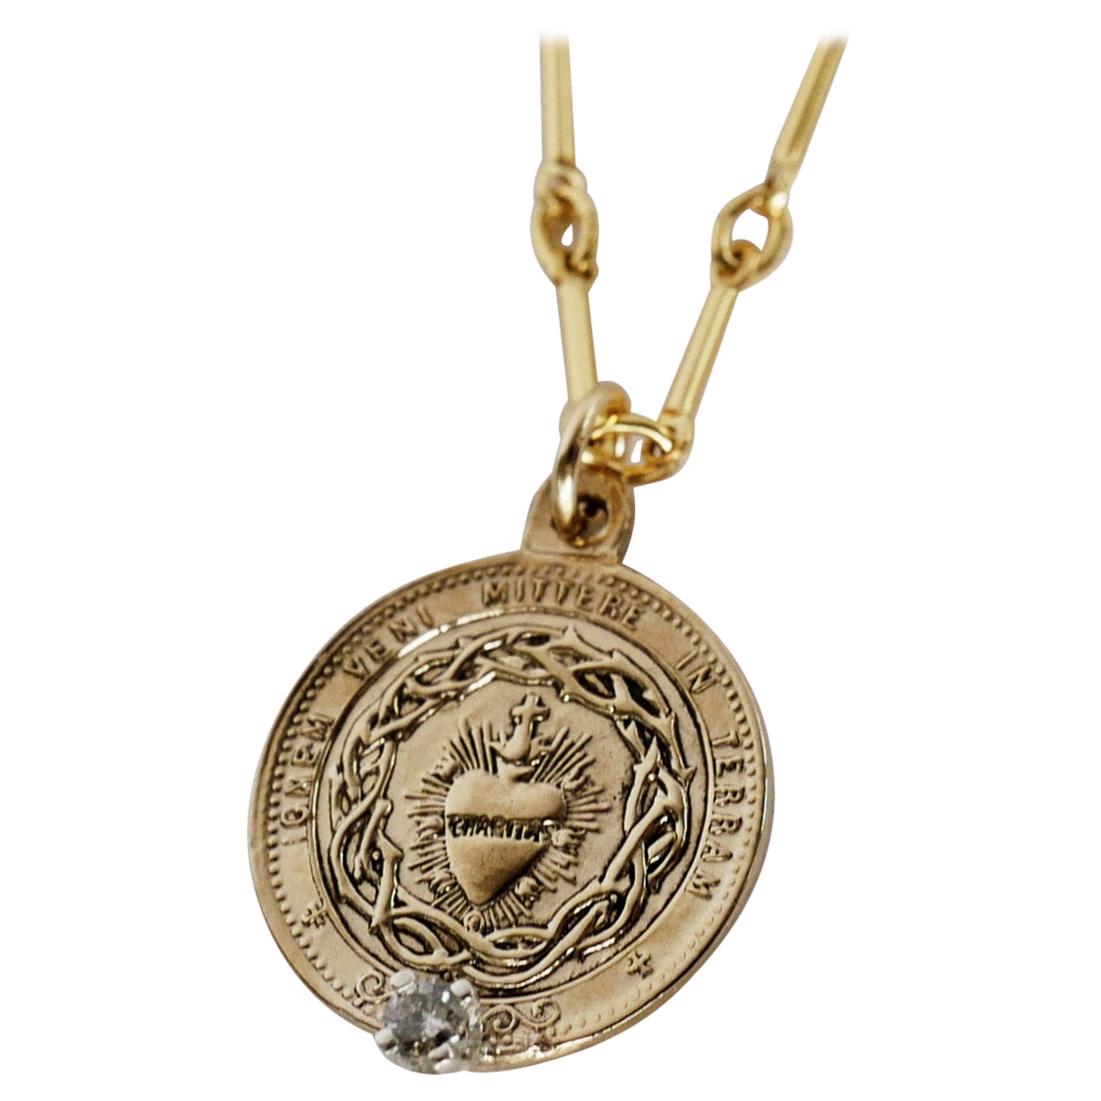 White Diamond Sacred Heart Coin Medal Pendant Gold Filled Chain Necklace

The Sacred Heart (also known as the Sacred Heart of Jesus) has one of the deepest meanings in the Roman Catholic practice. The symbol represents Jesus Christ’s actual heart as